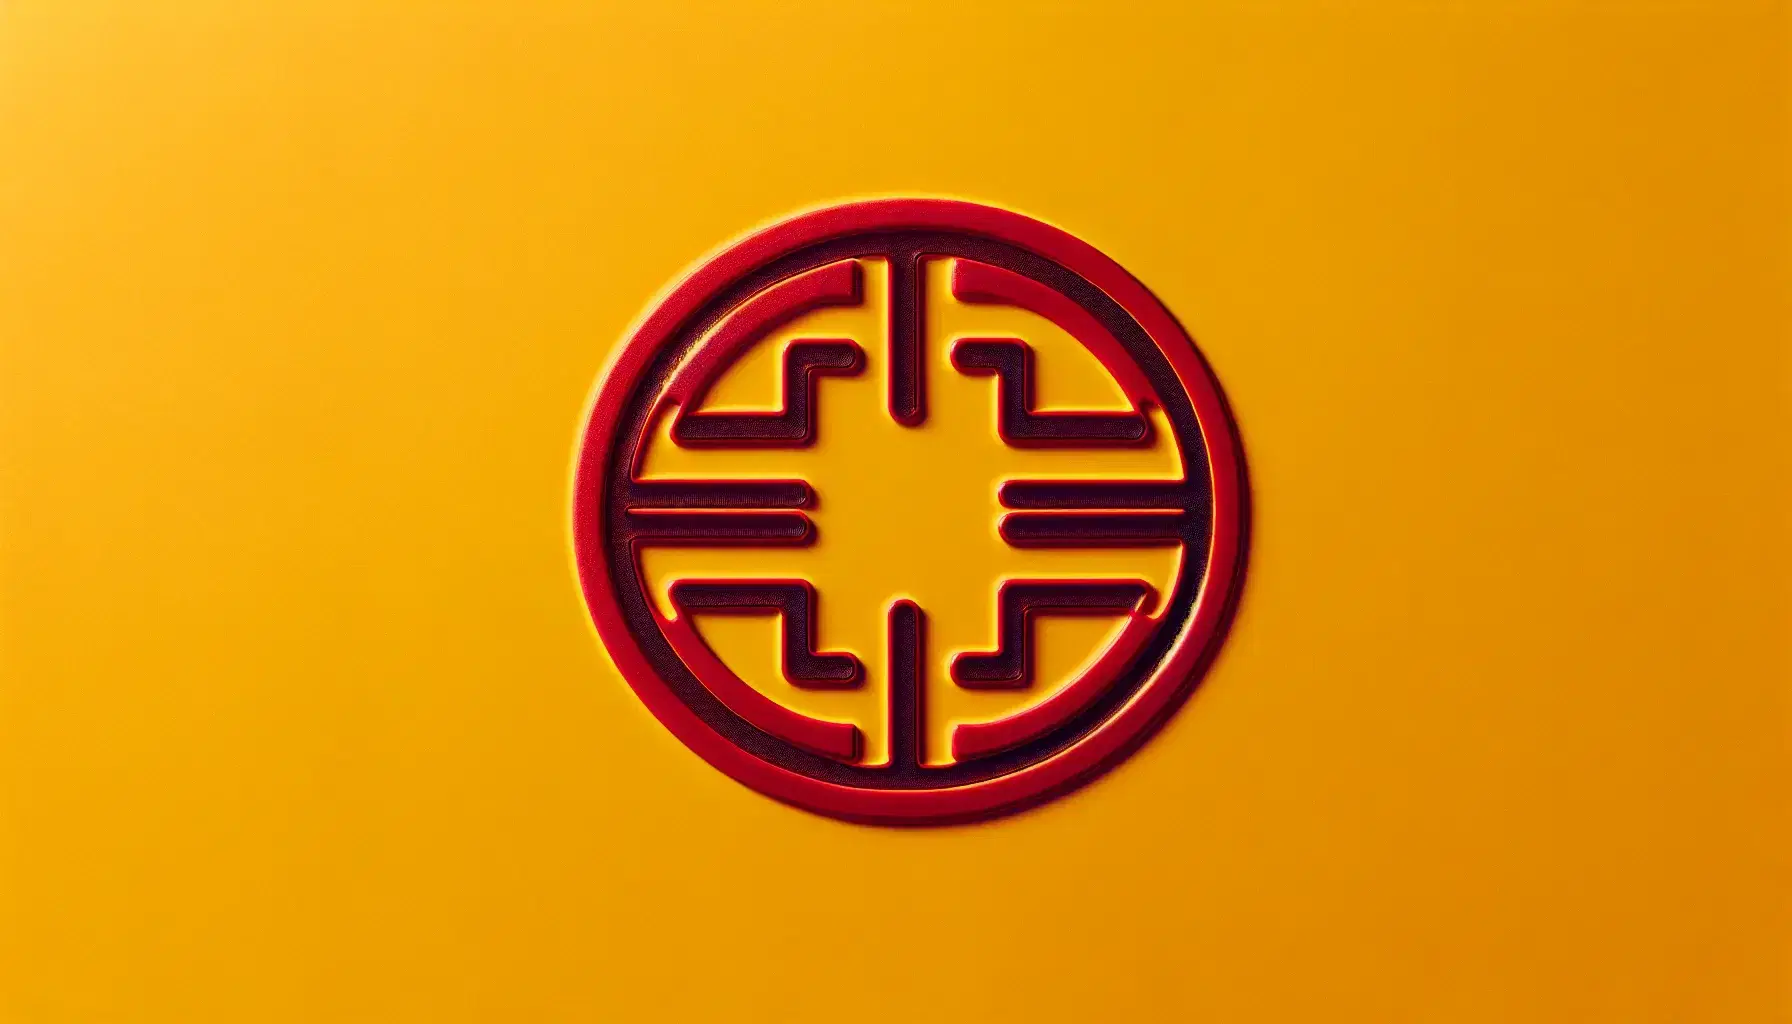 Red Aunt Sun symbol on a yellow background, with circle and rays in four directions representing the four aspects of life.